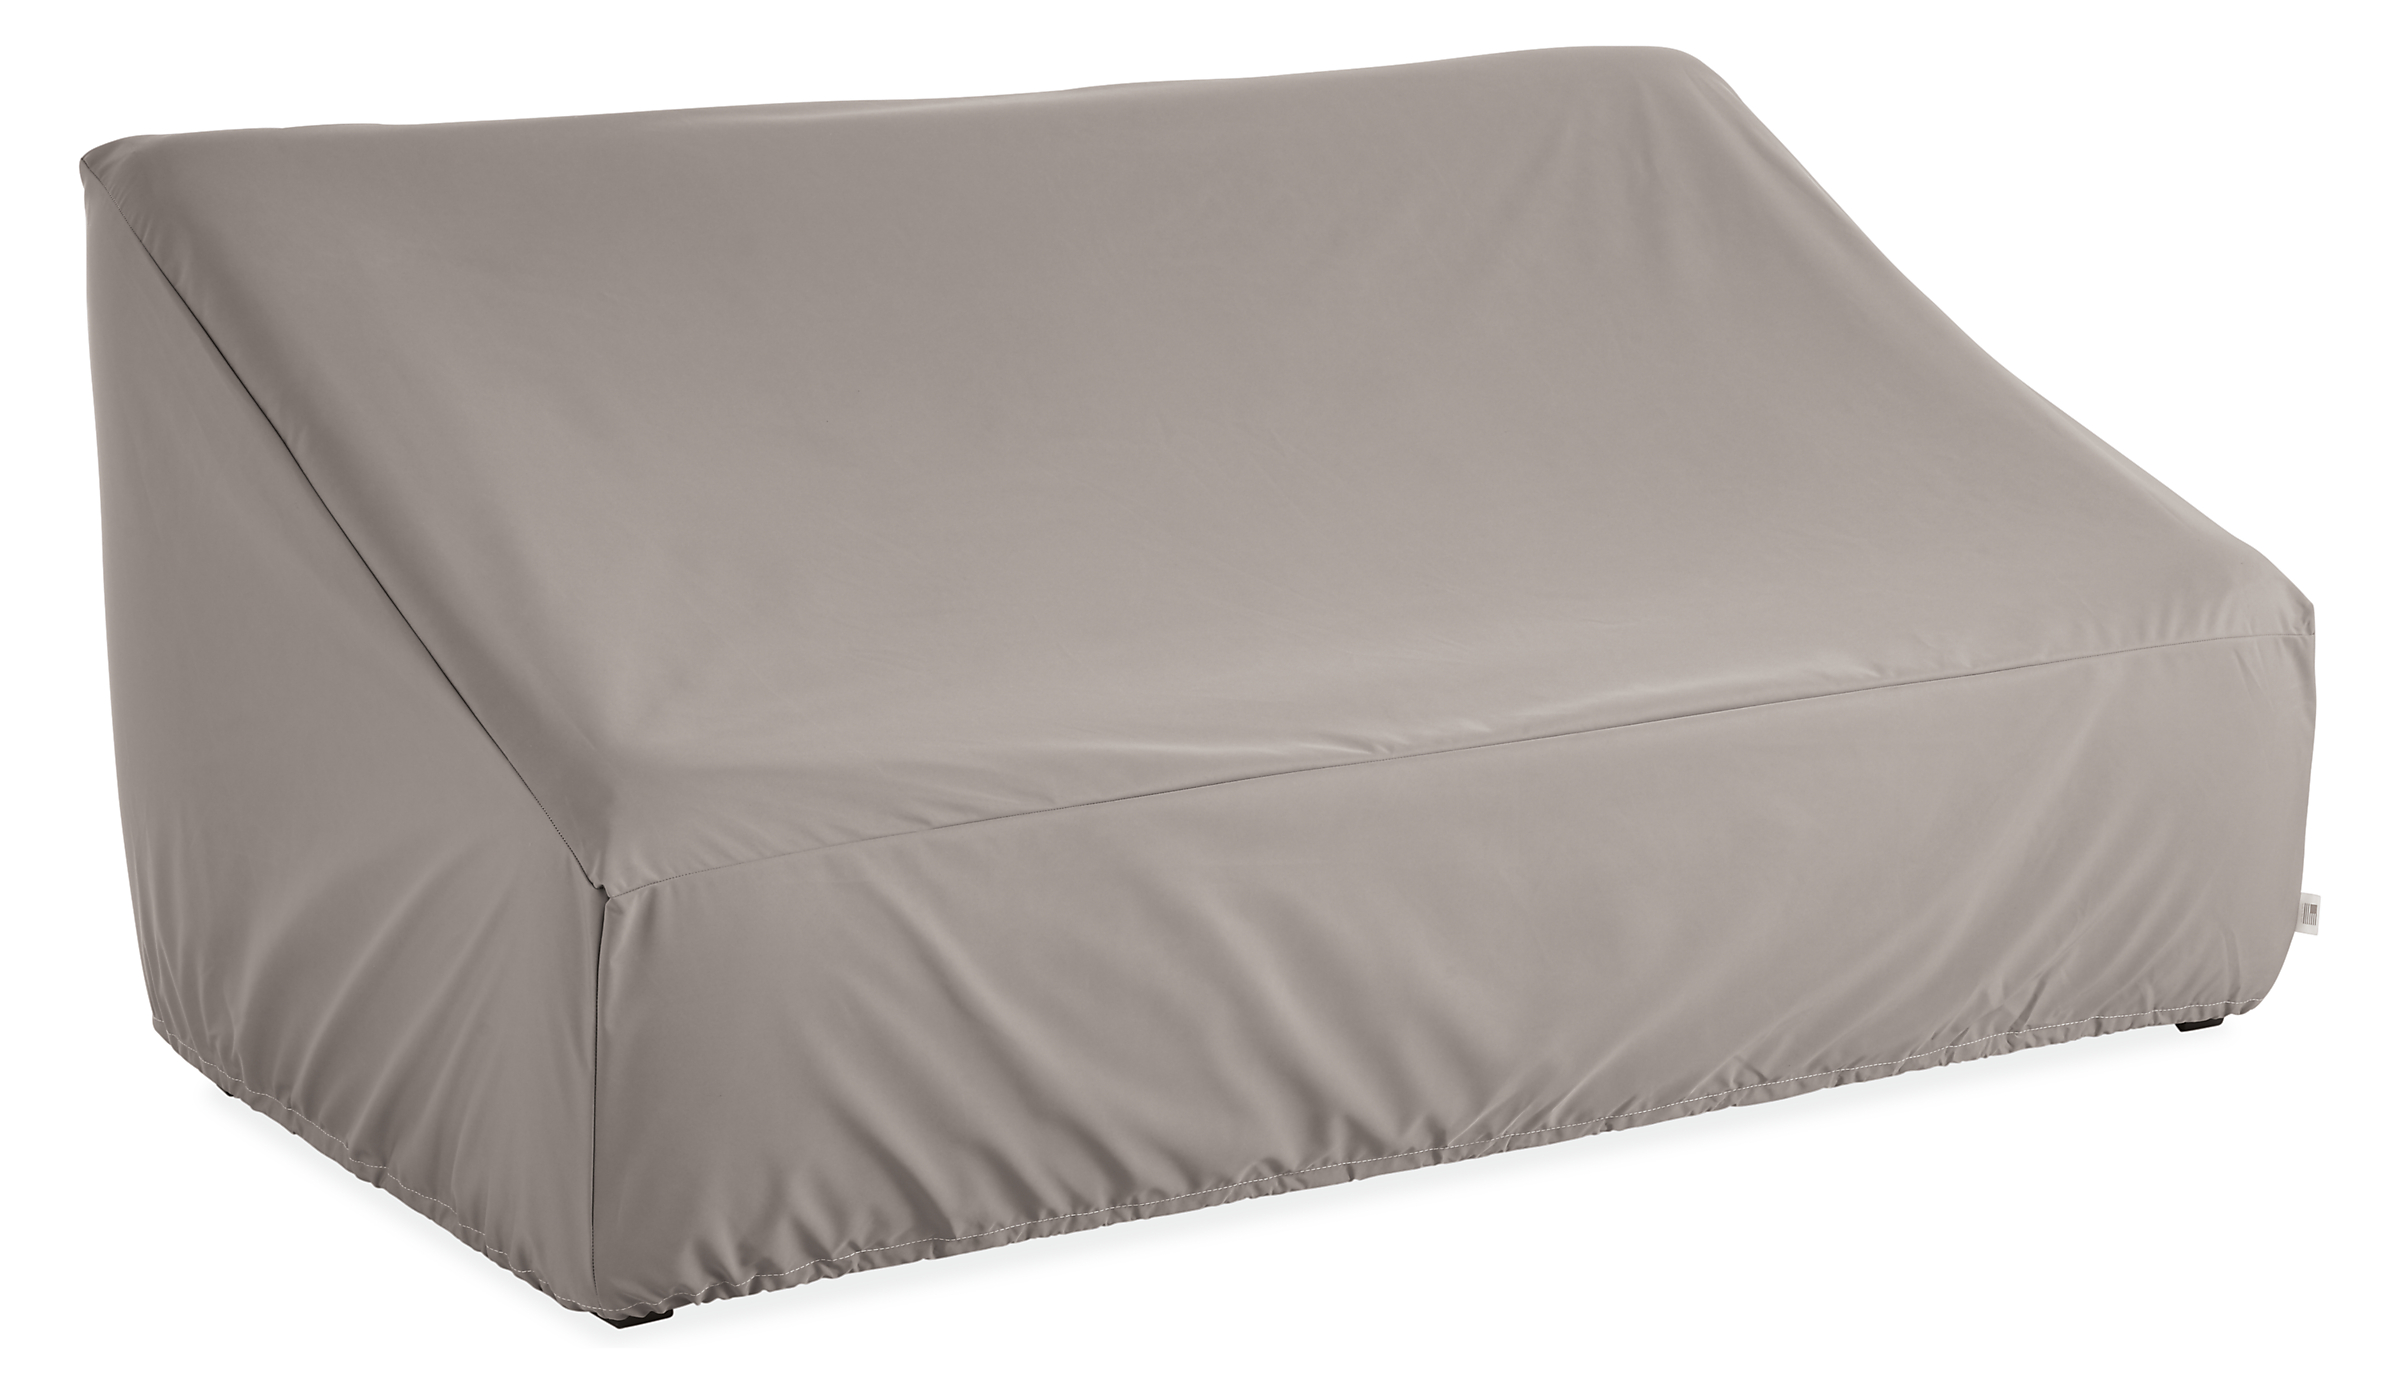 Outdoor Cover for Sofa 71w 40d 32h with Drawstring